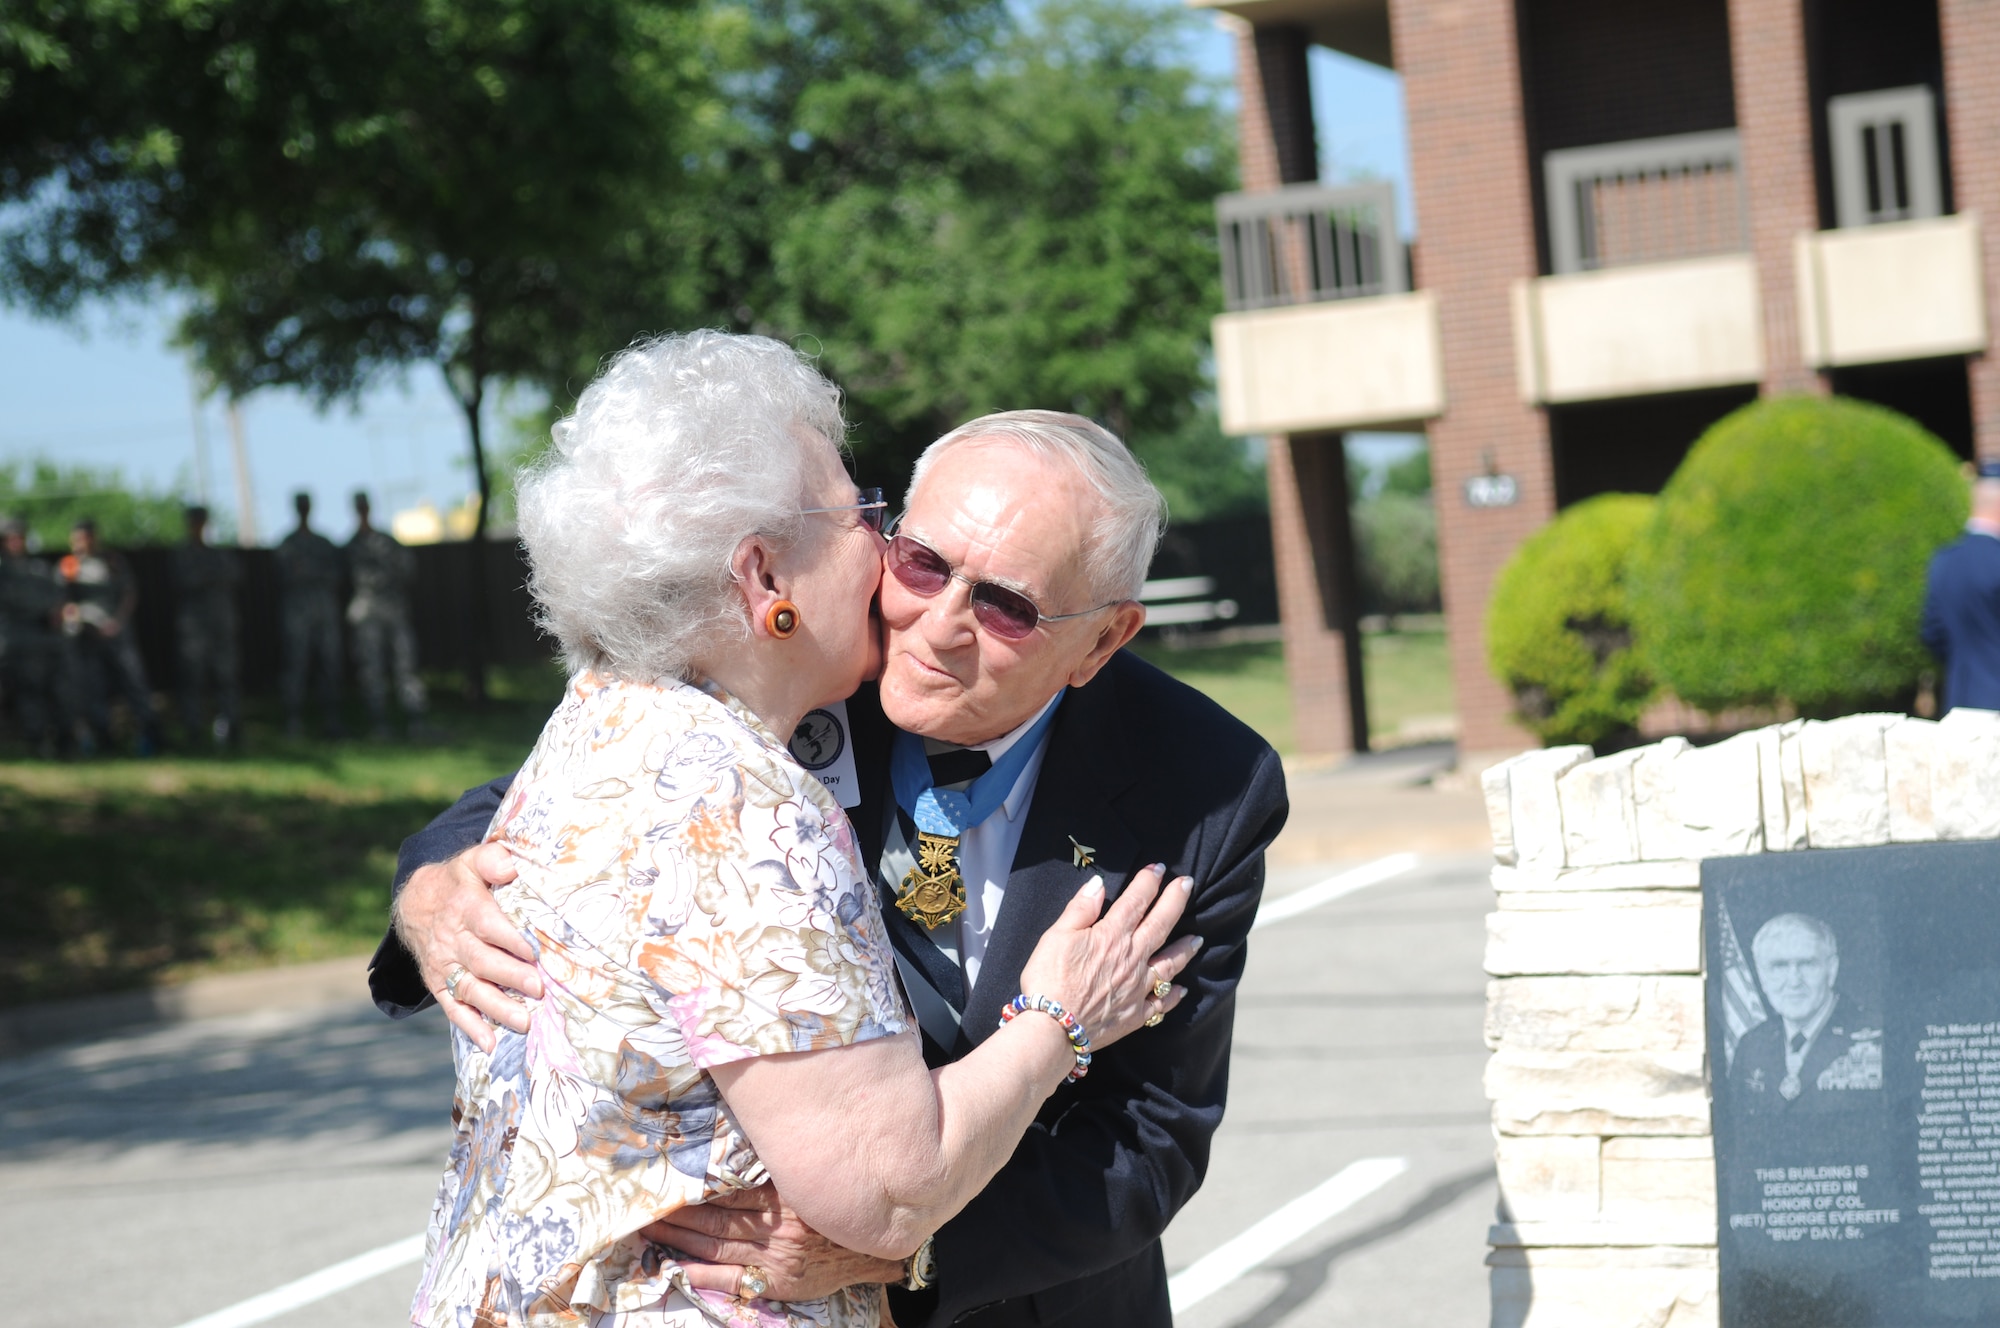 GOODFELLOW AIR FORCE BASE, Texas – Retired Col. George E. “Bud” Day embraces his wife Doris after the unveiling of “Day Manor,” May 7, 2010. Two Visiting Officer Quarters were named in honor of retired Air Force Colonels Day and Leo K. Thorsness, both of whom received the Medal of Honor for actions while serving in Vietnam. (U.S. Air Force photo/Airman 1st Class Clayton Lenhardt)